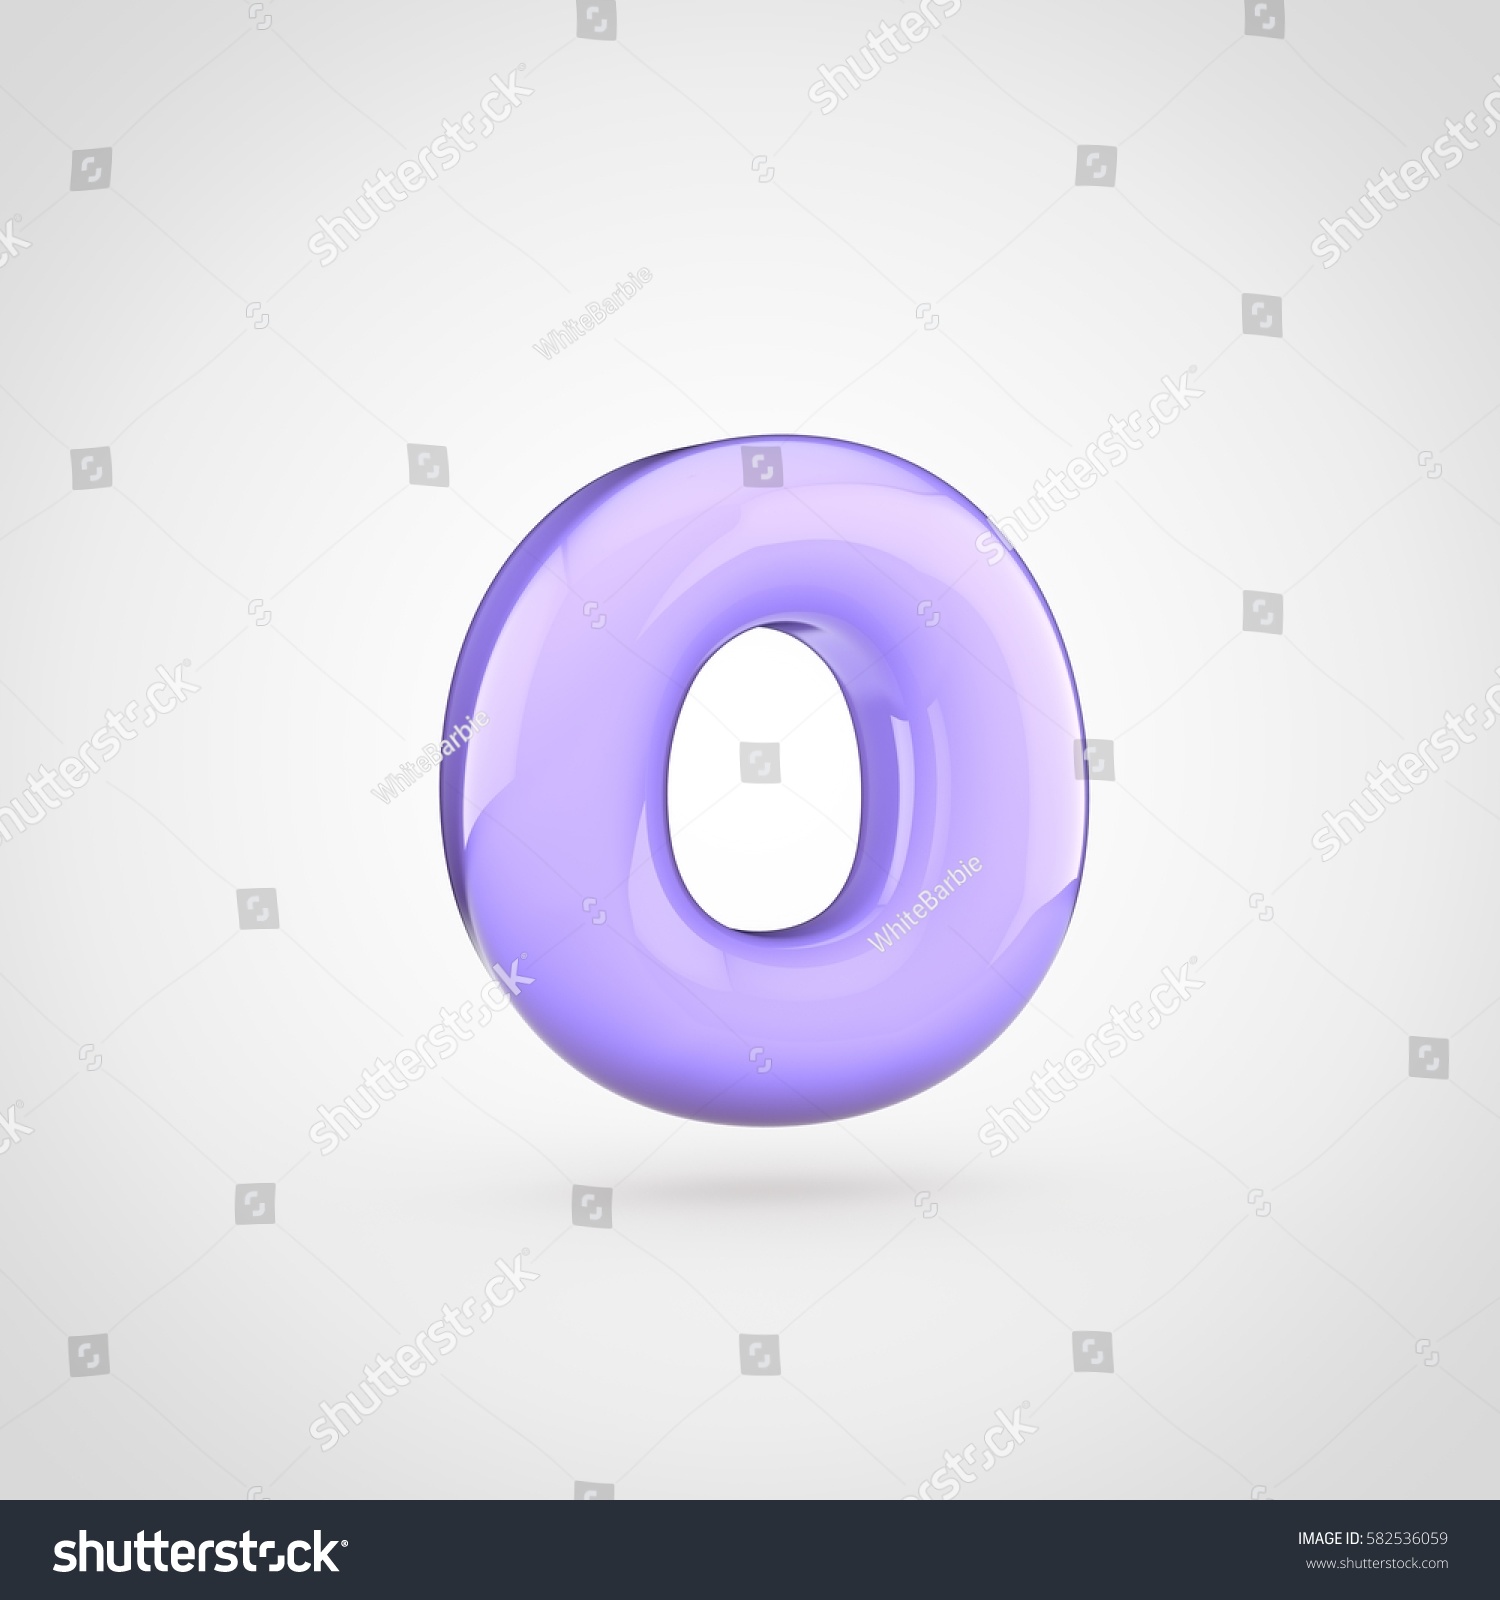 Glossy Violet Paint Letter O Lowercase Stock Illustration 582536059